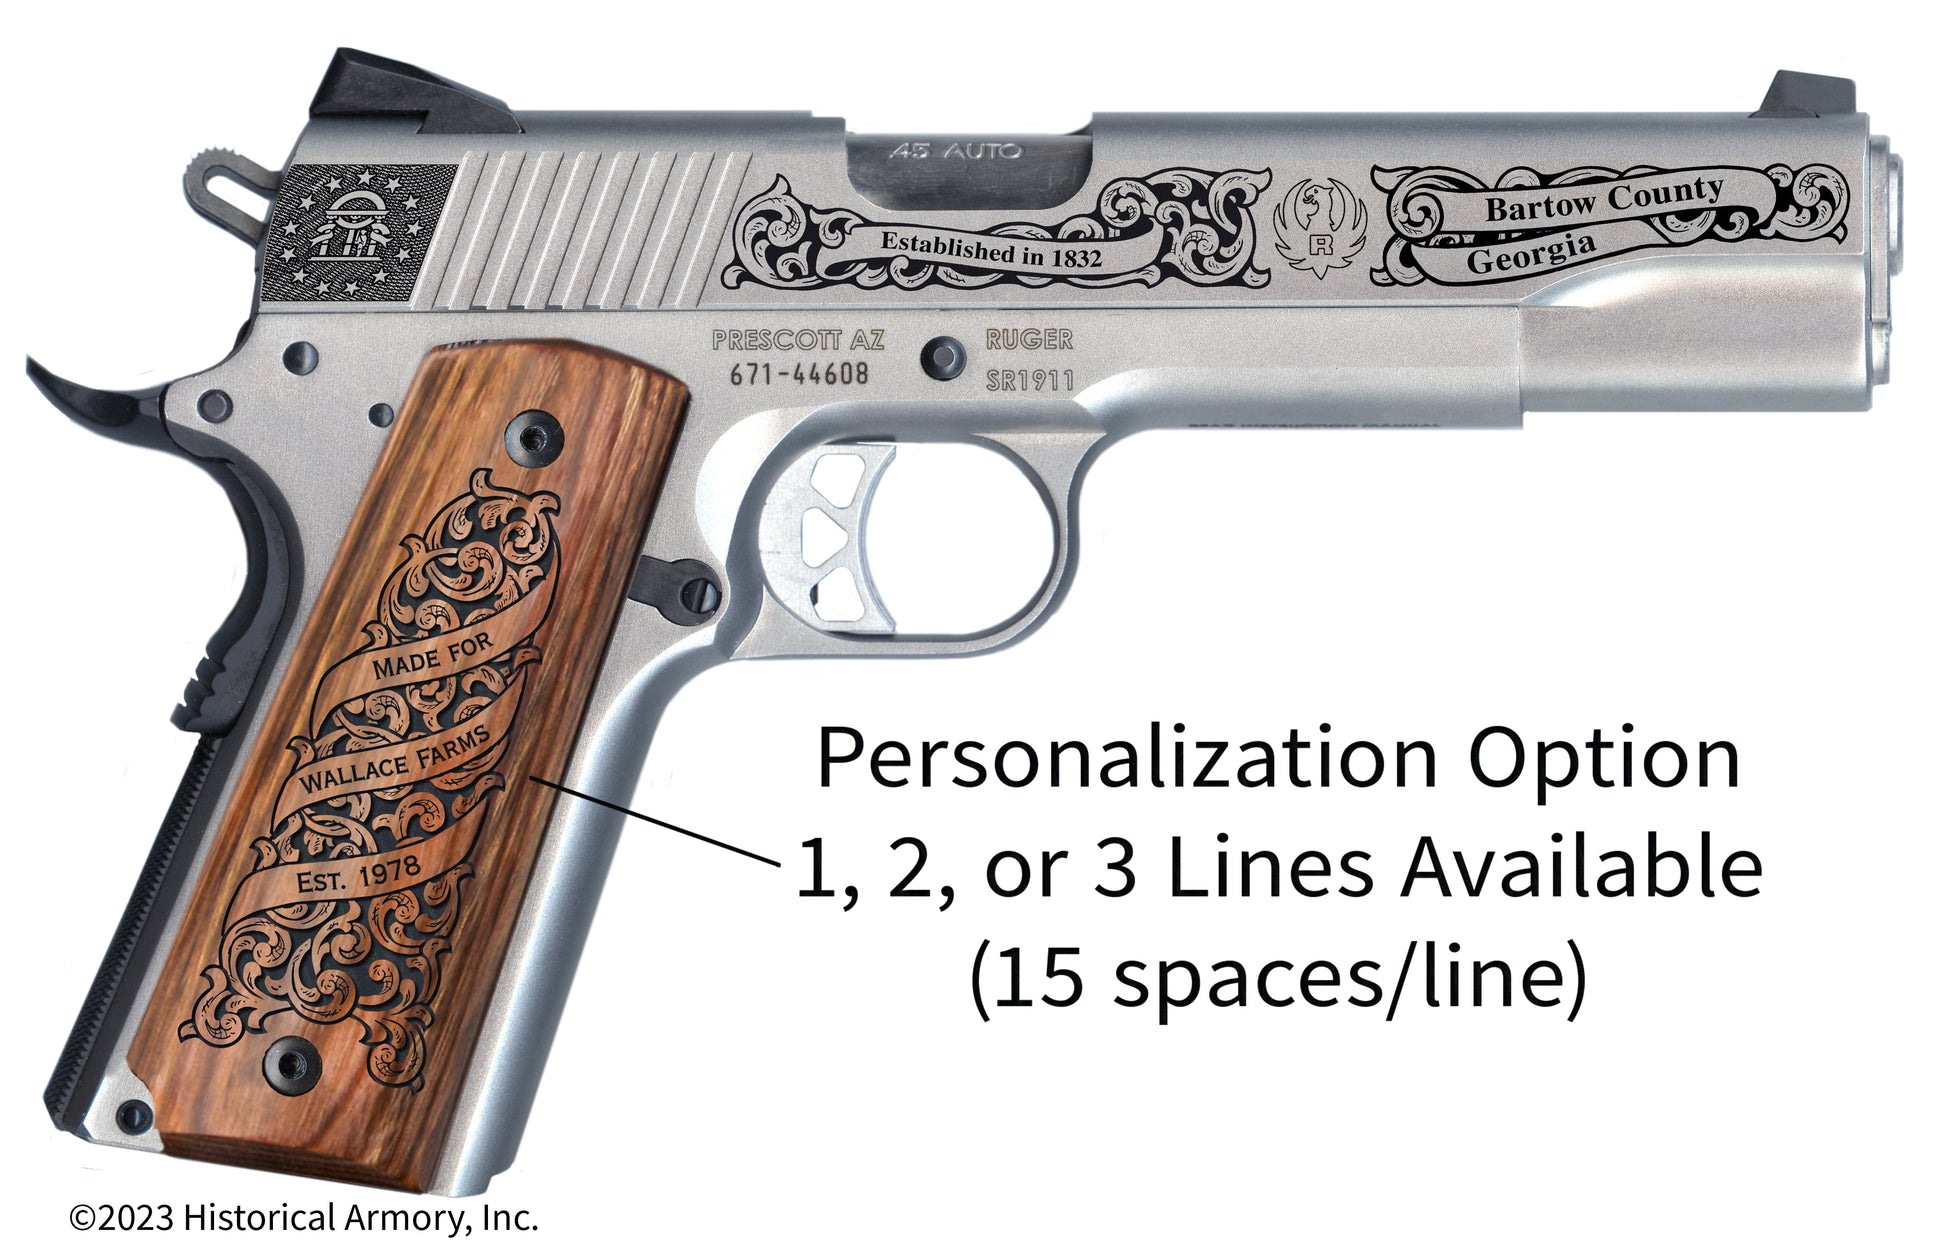 Bartow County Georgia Personalized Engraved .45 Auto Ruger 1911